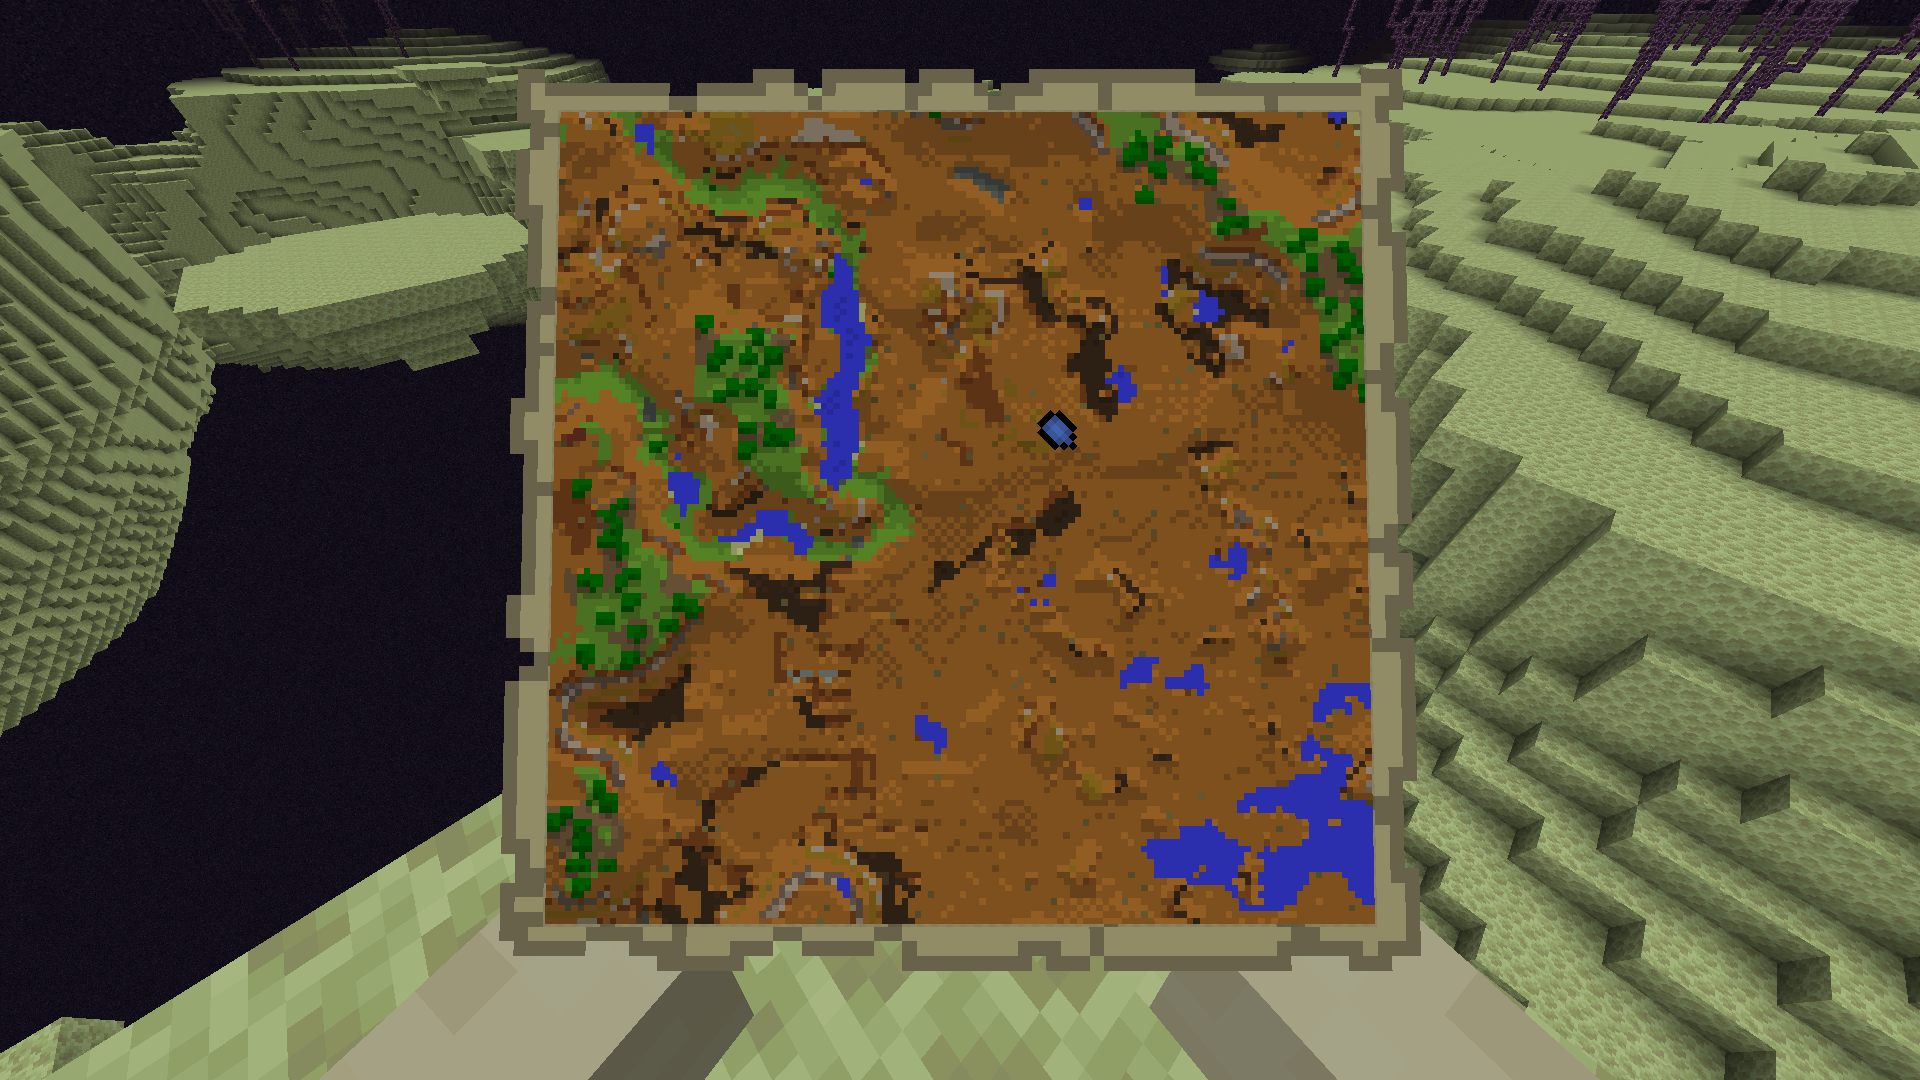 Overworld map in the End